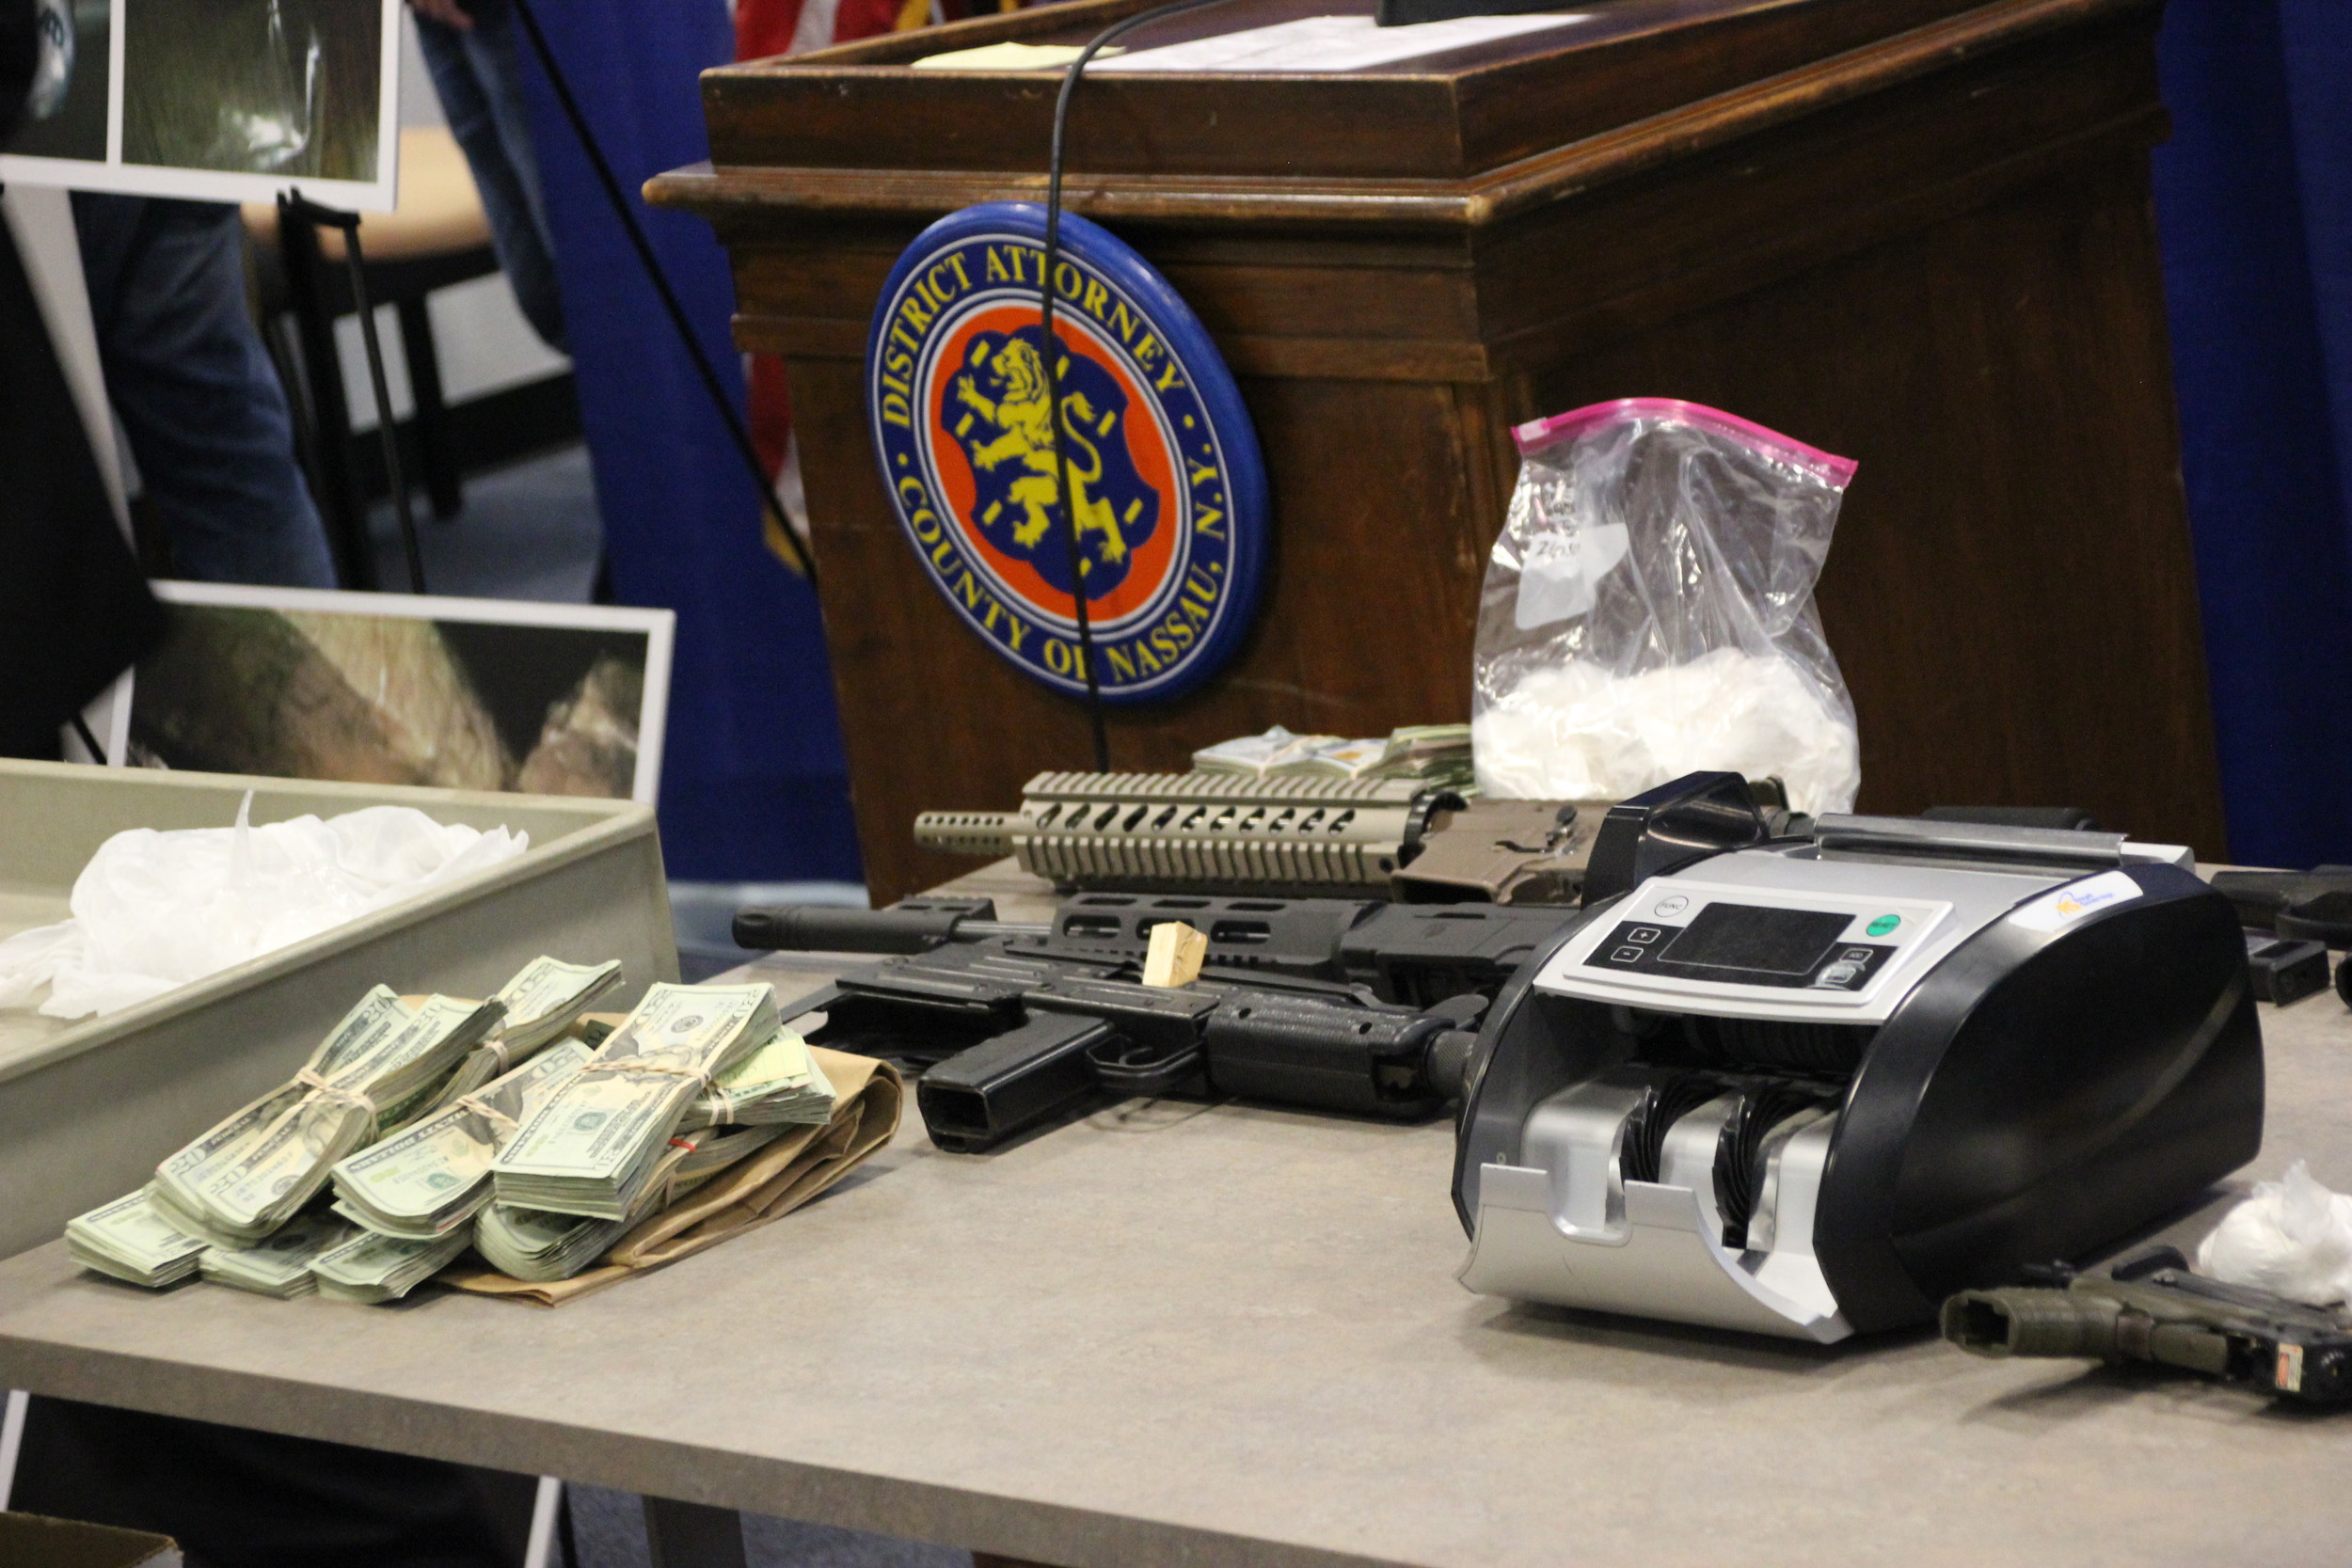 Drug paraphernalia and $75,000 cash were recovered from suspects’ residences on July 14.